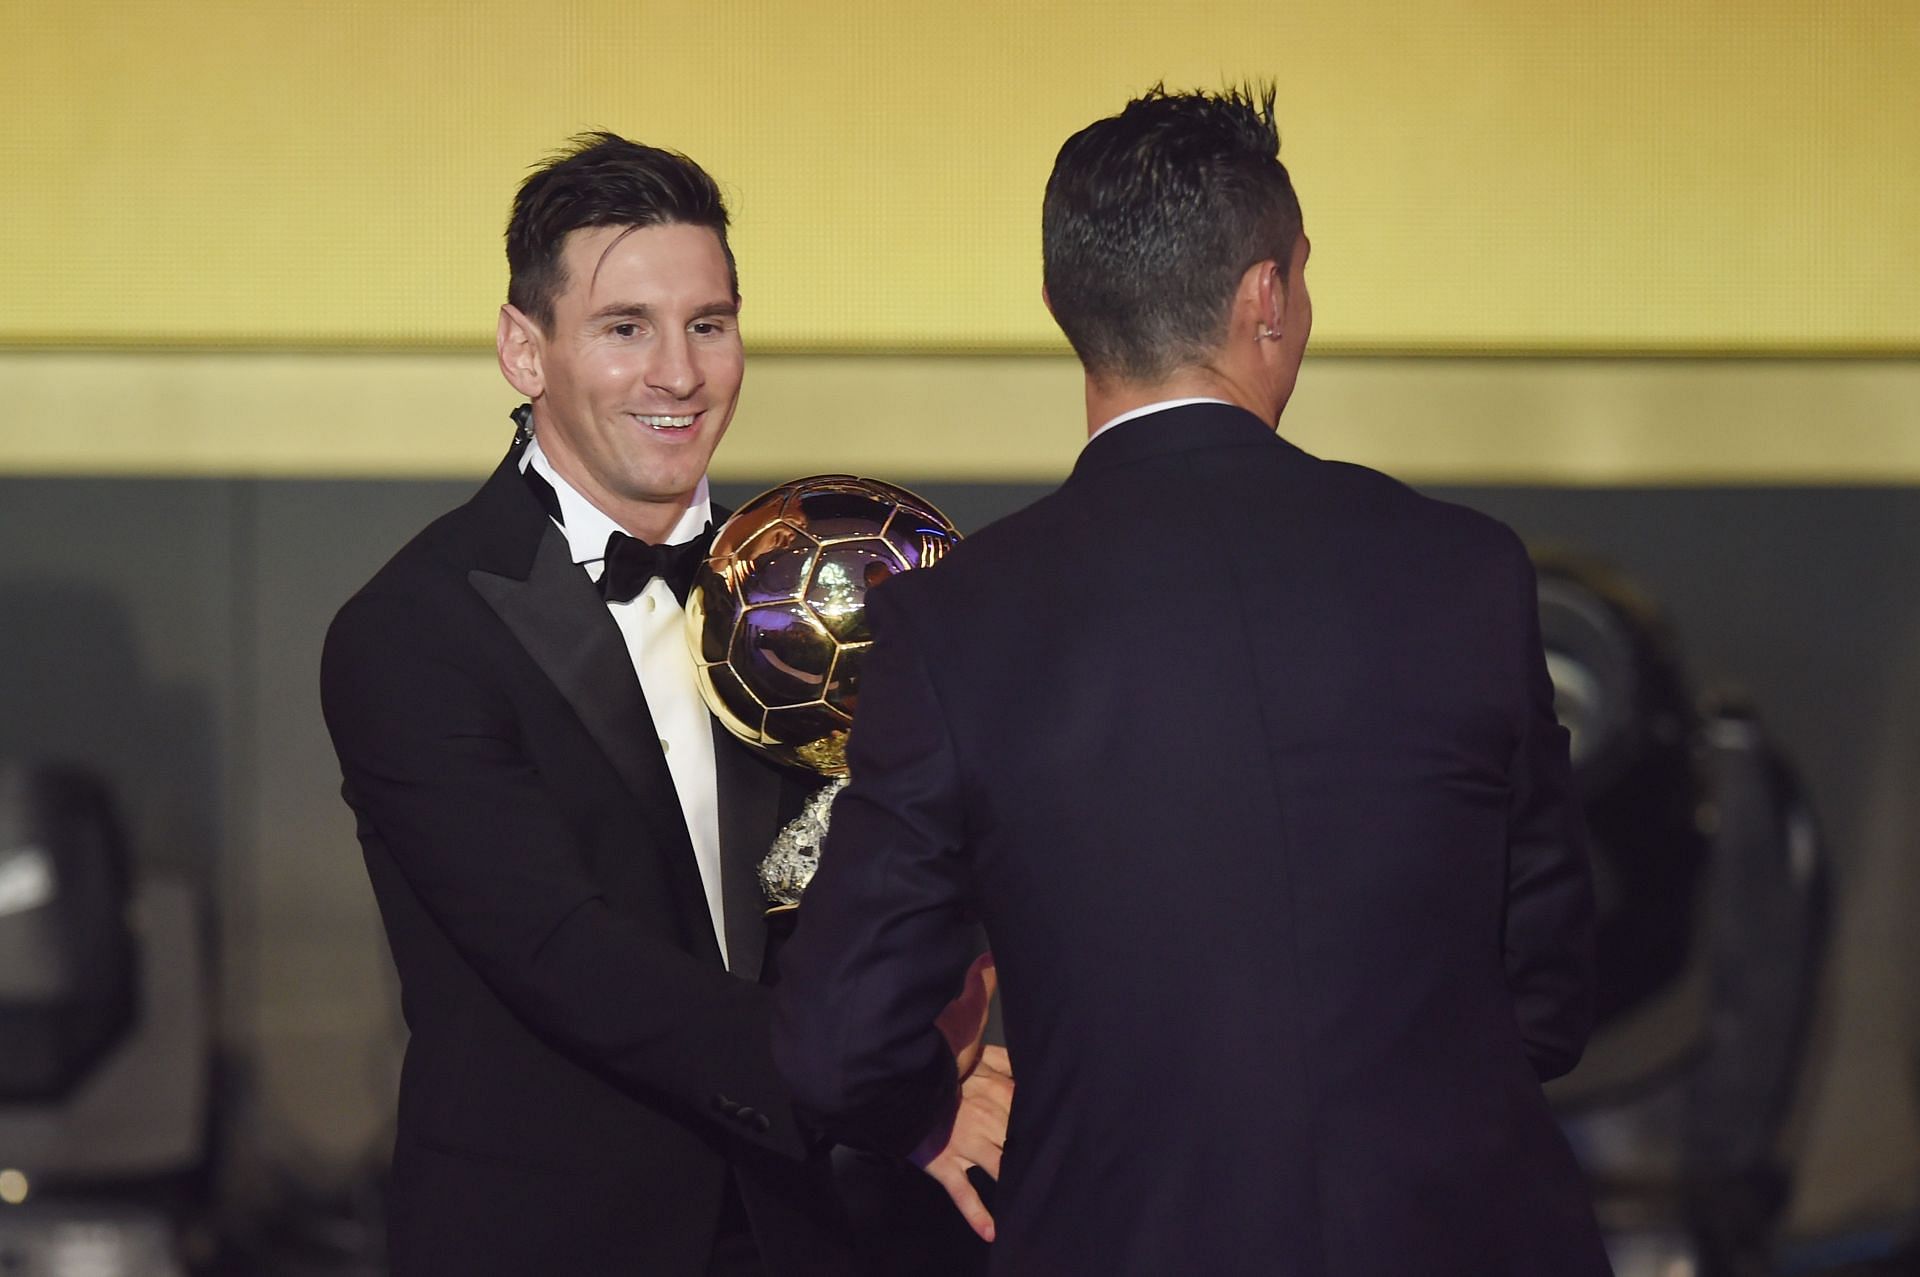 Lionel Messi looks set to win the award for the eighth time.